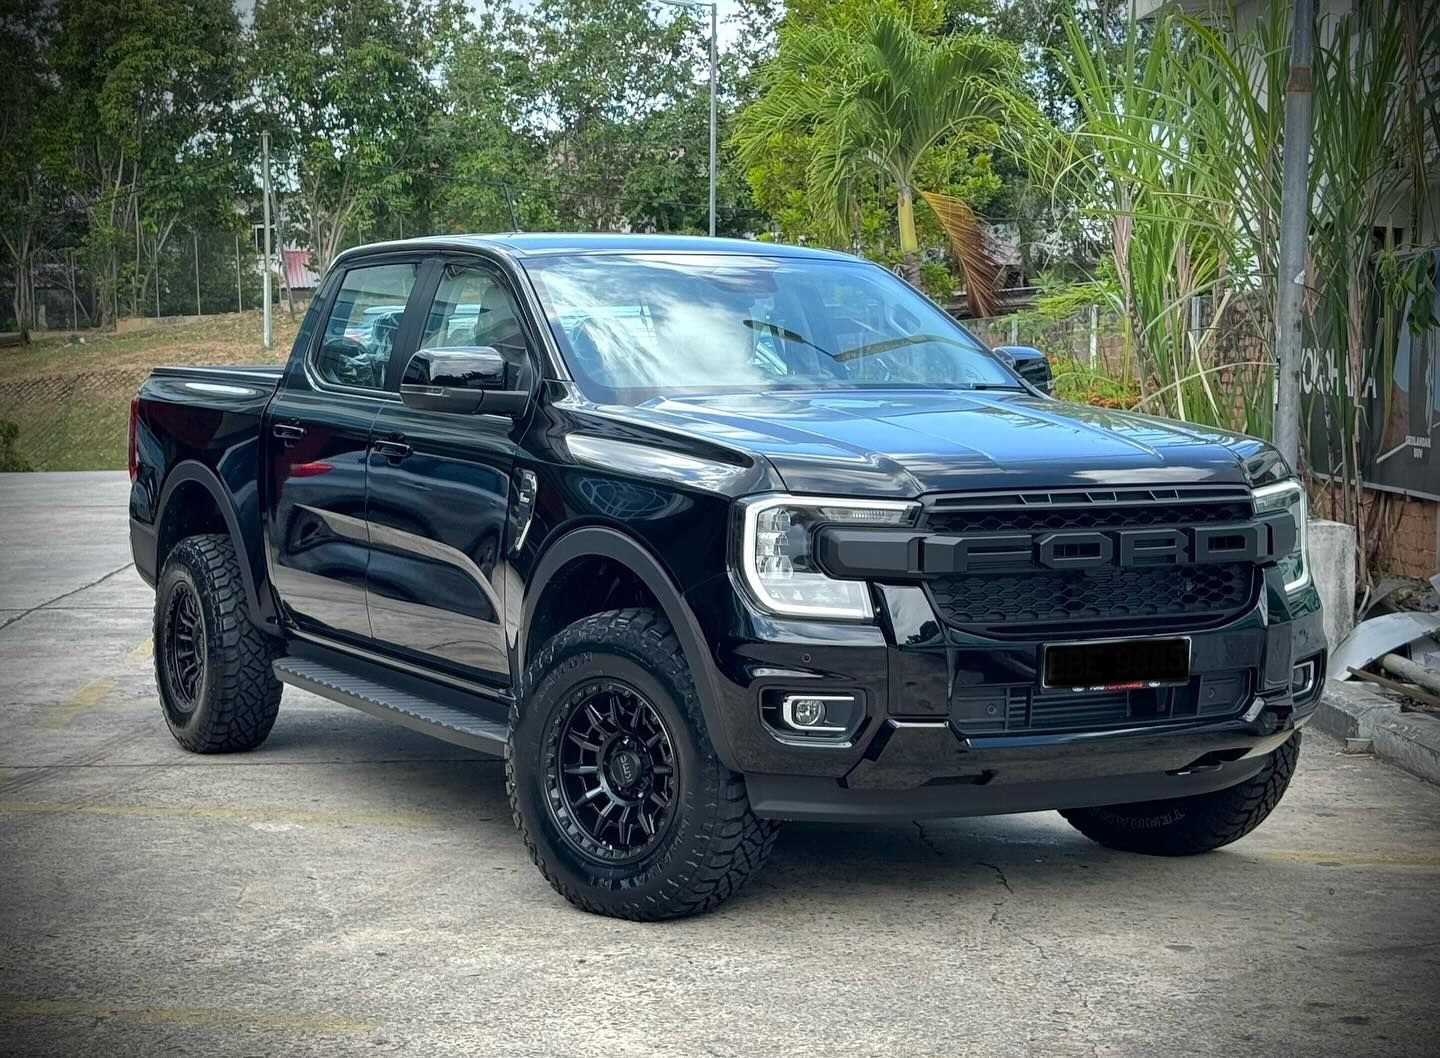 Ford Ranger Next-Gen with 17×9-inch KMC KM547 Carnage